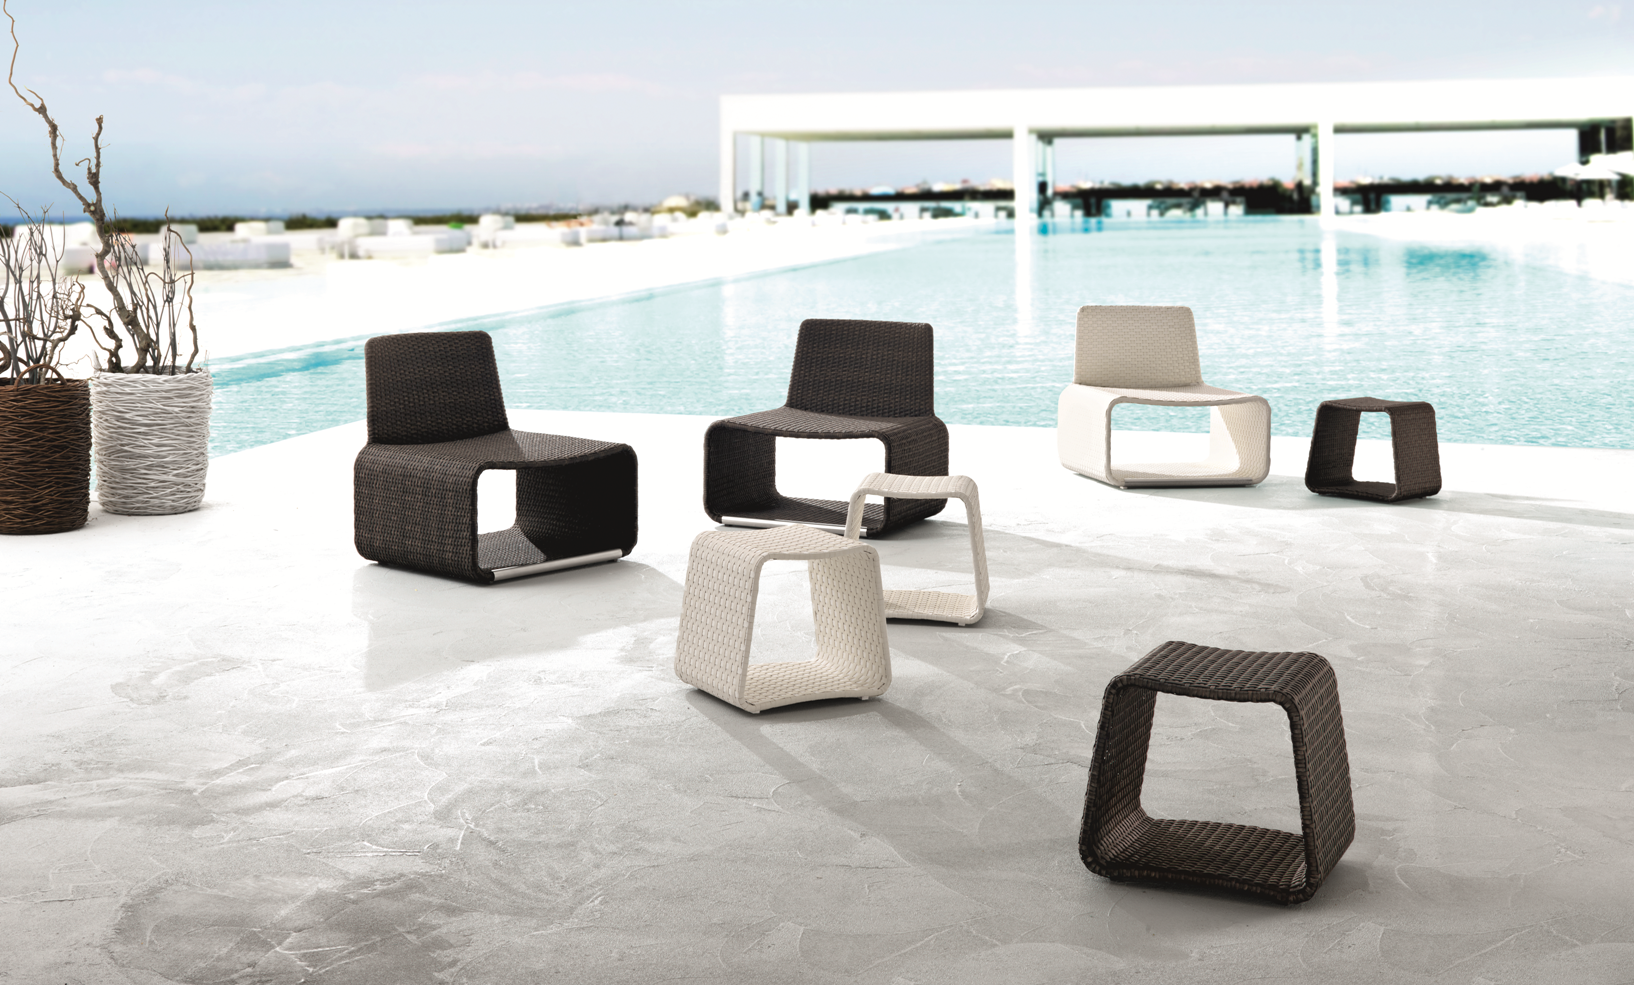 Outdoor chairs and side tables in black and white